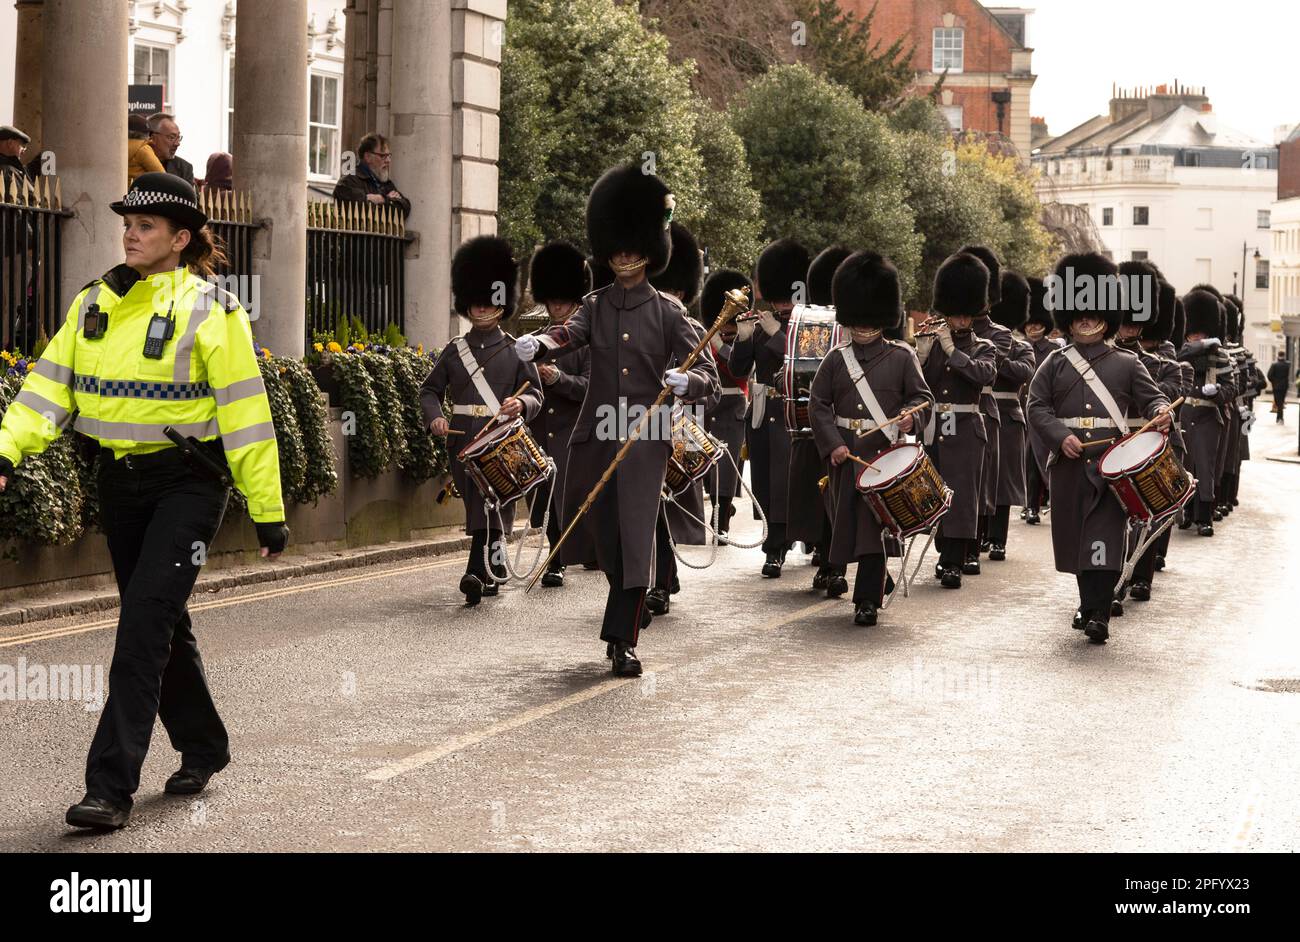 Windsor, Berkshire, England, UK. 2023. Corps of Drums, 1st Battalion Welsh Guards led by a policewoman marching past the Guidhall in Windsor, UK. Stock Photo